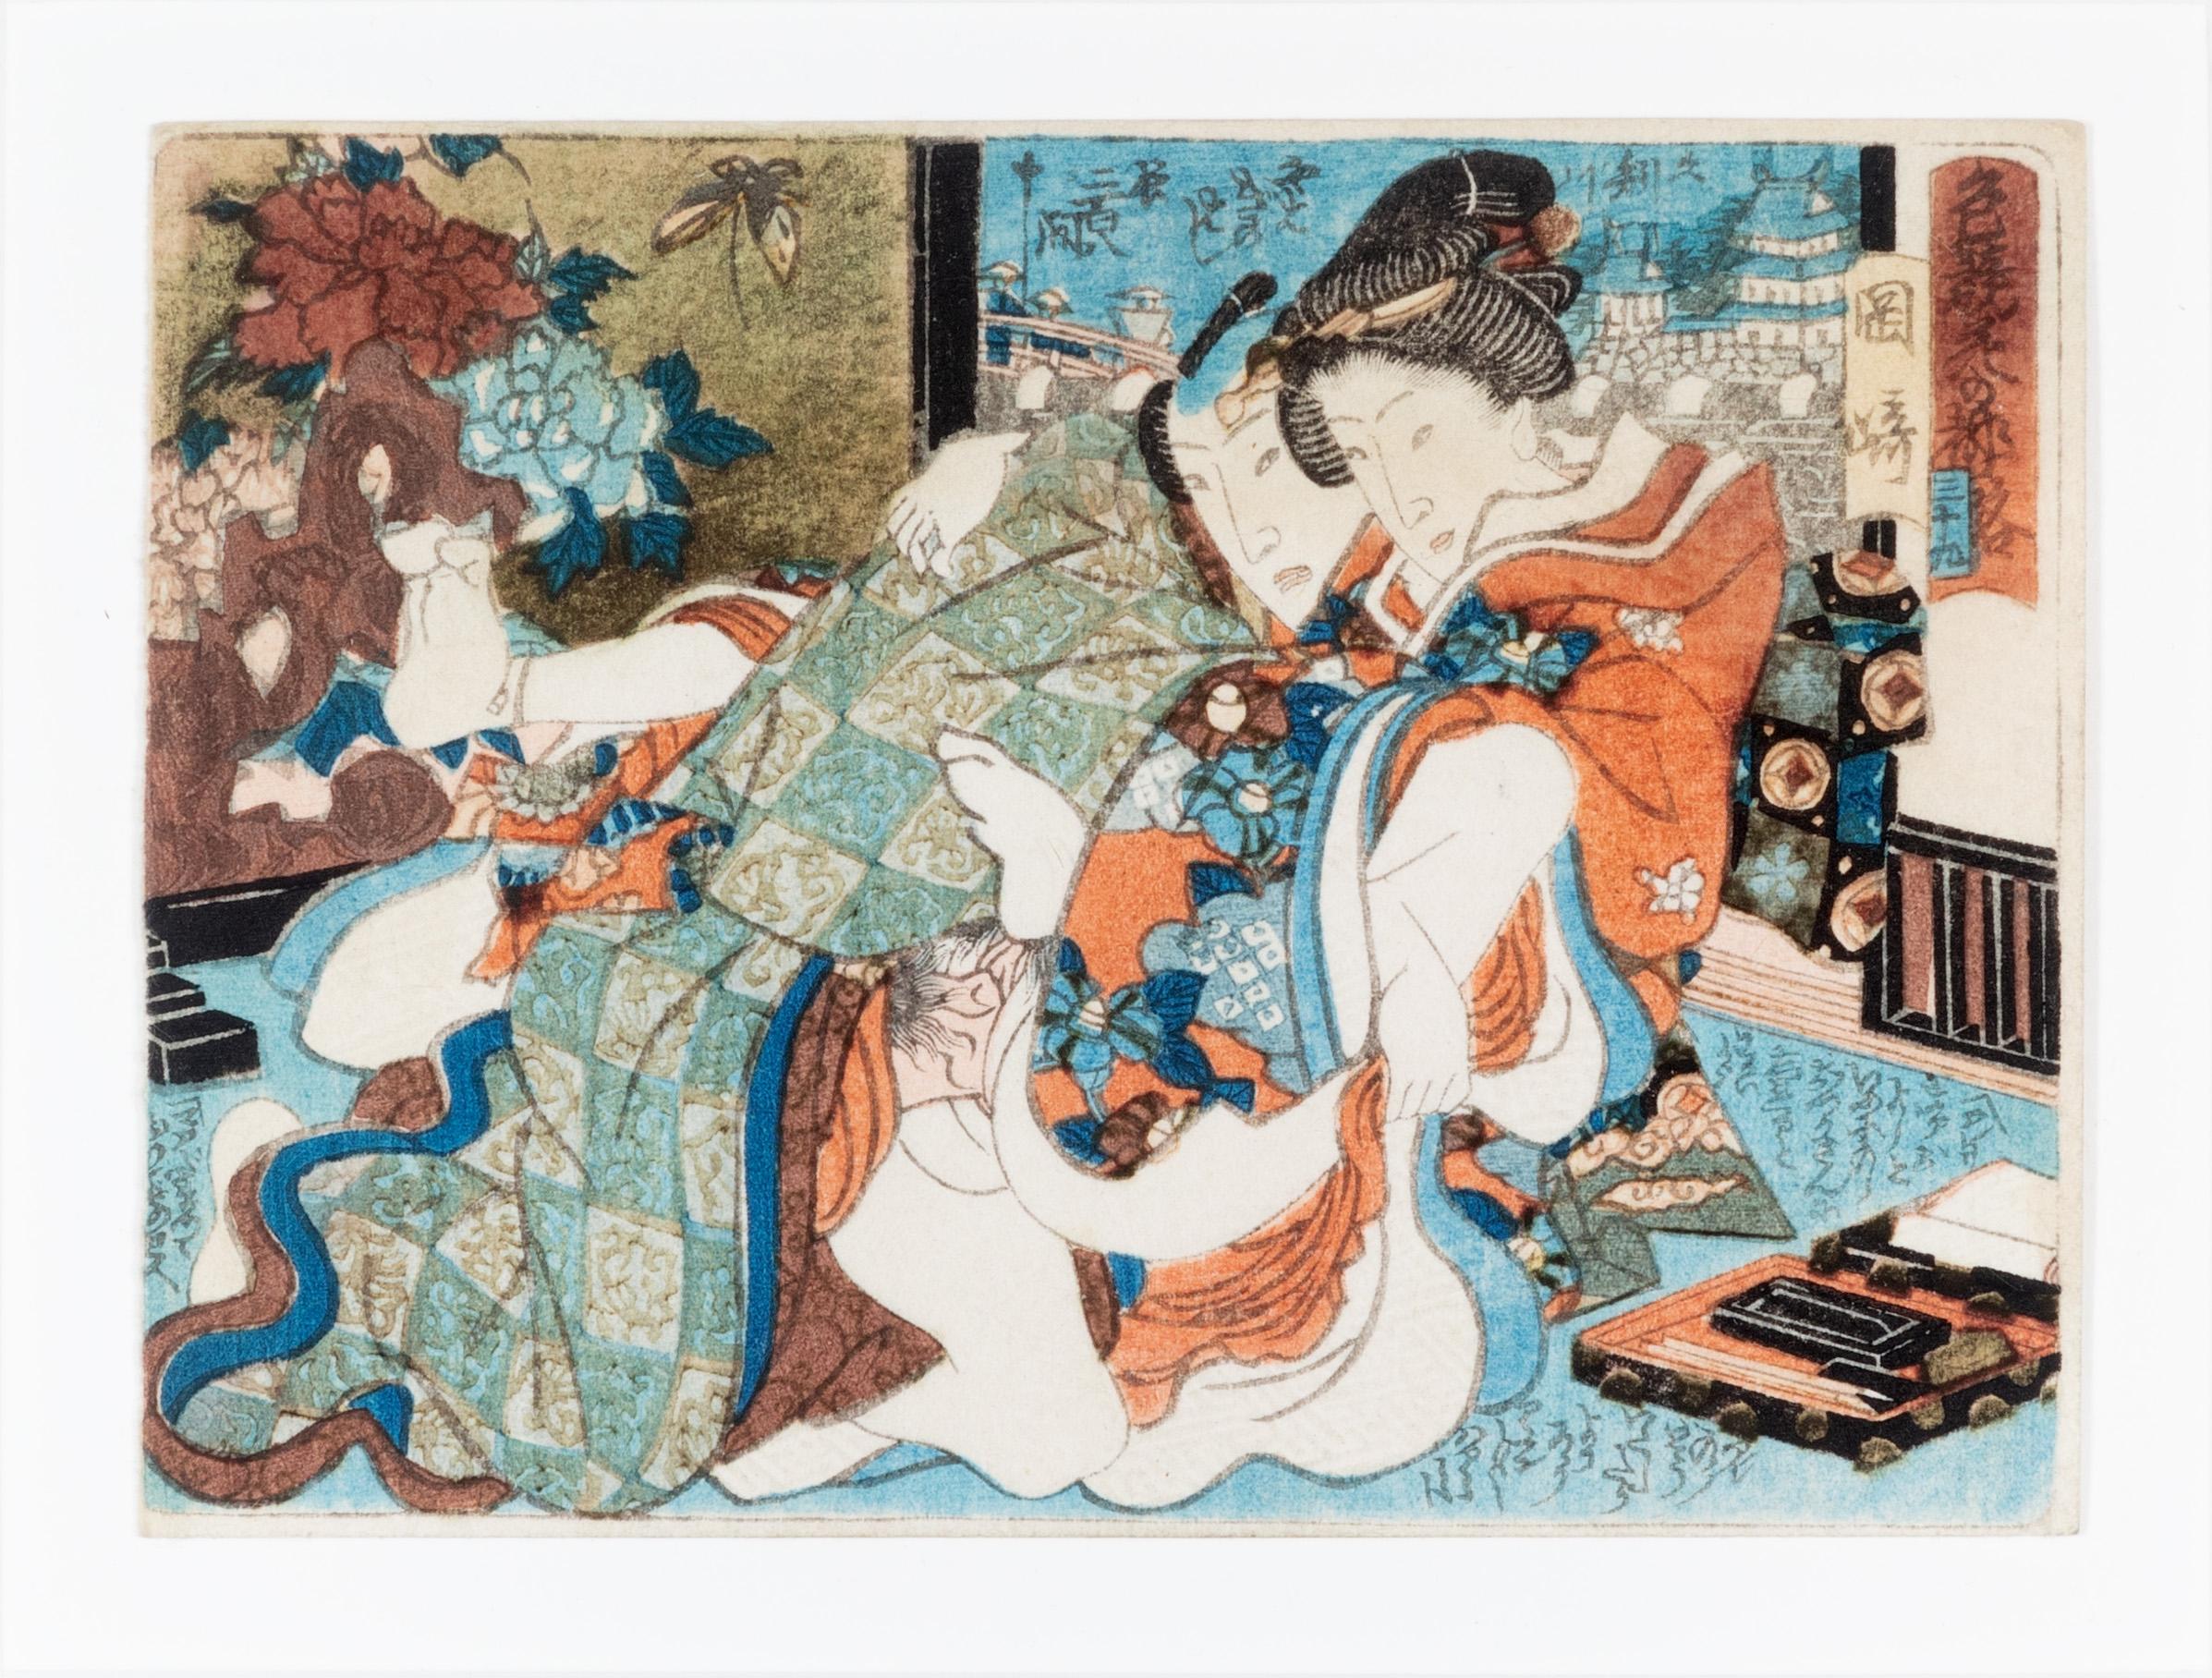 The present work is an excellent example of the erotic Shunga prints produced by Utagawa 'Ando' Hioshige and his school. Shunga imagery became especially widespread in Japan with the spread of the use of woodblock printing, allowing these images to